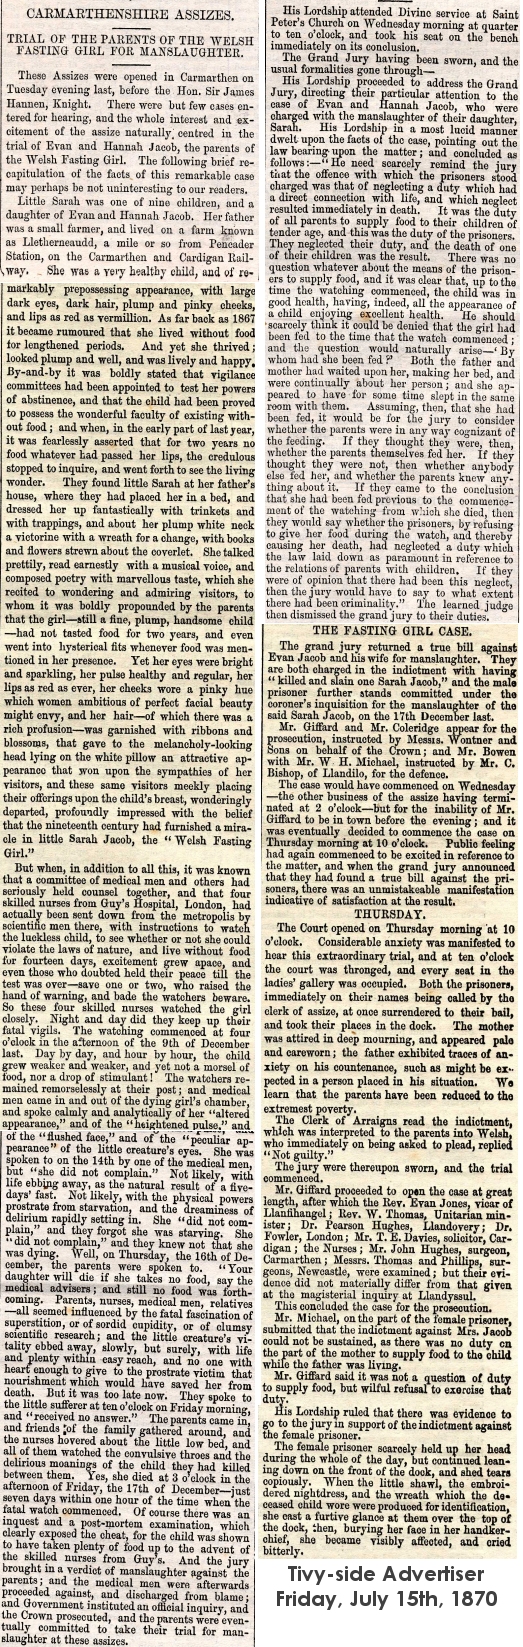 Newspaper report of the trial